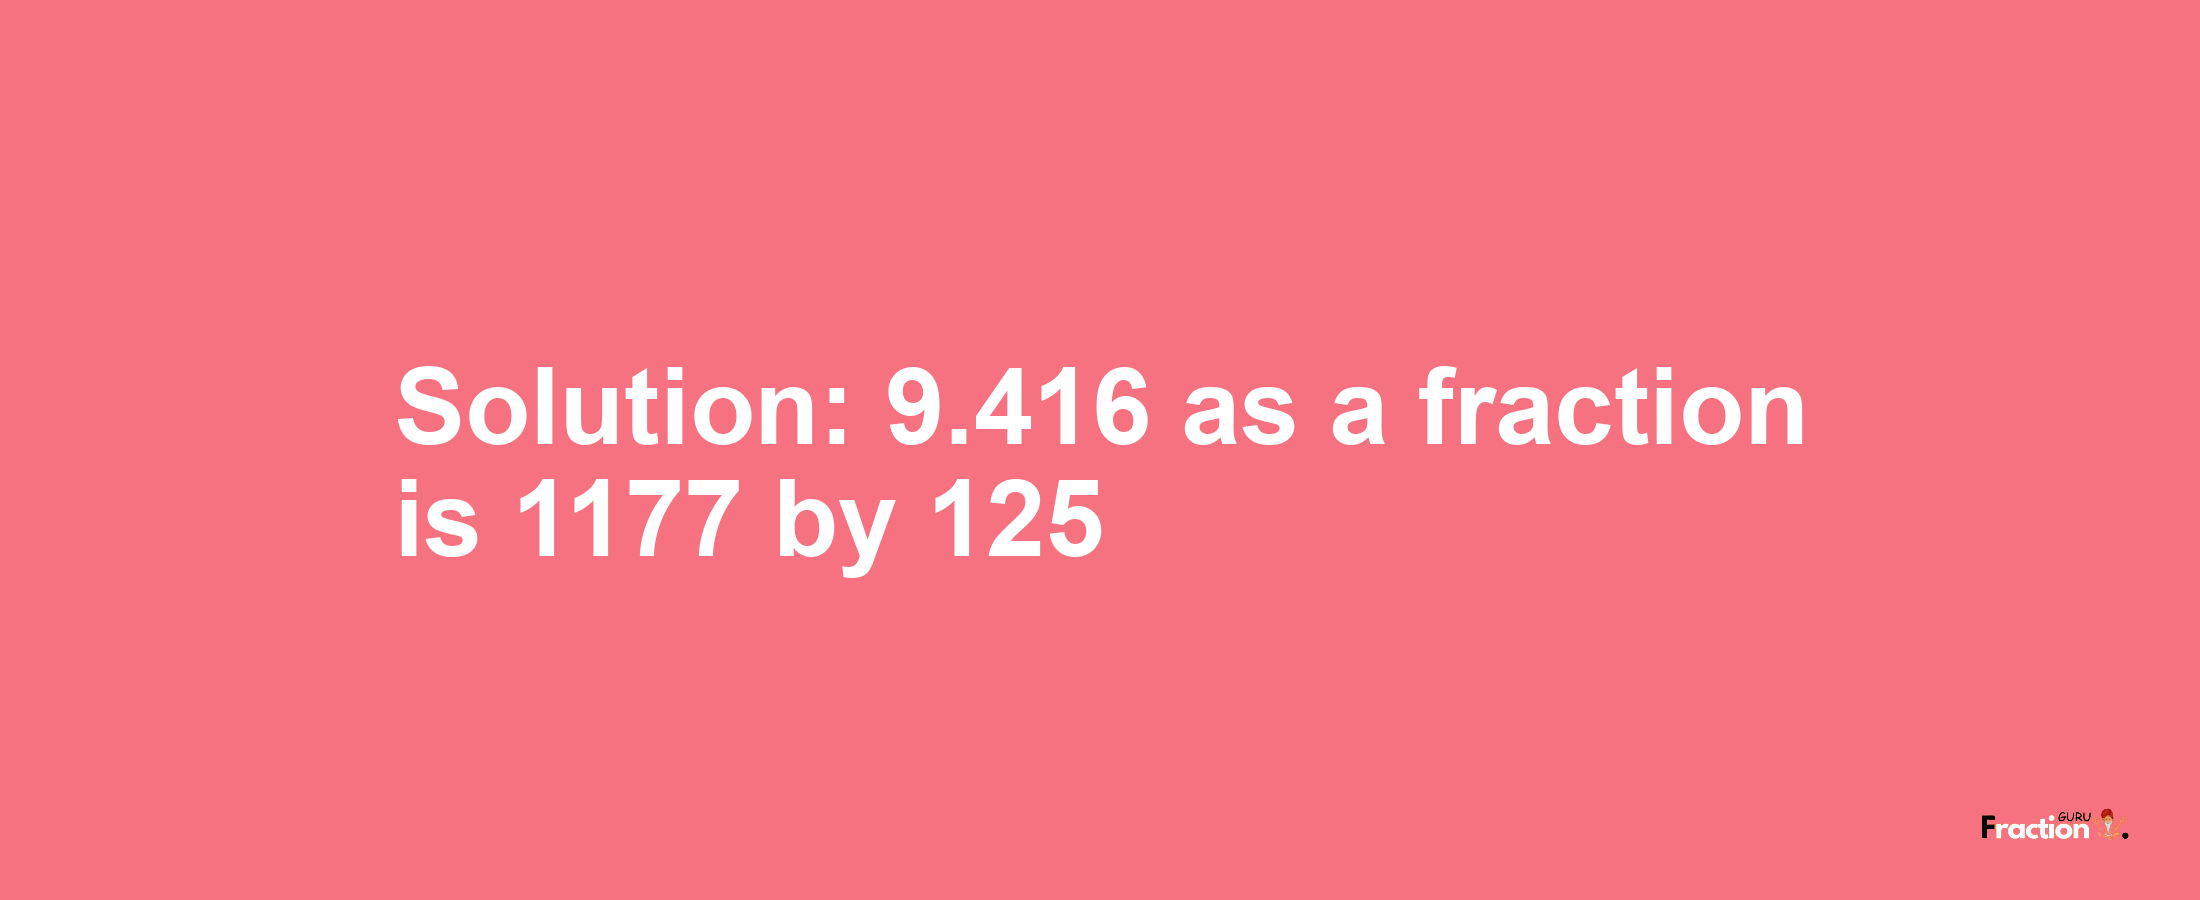 Solution:9.416 as a fraction is 1177/125